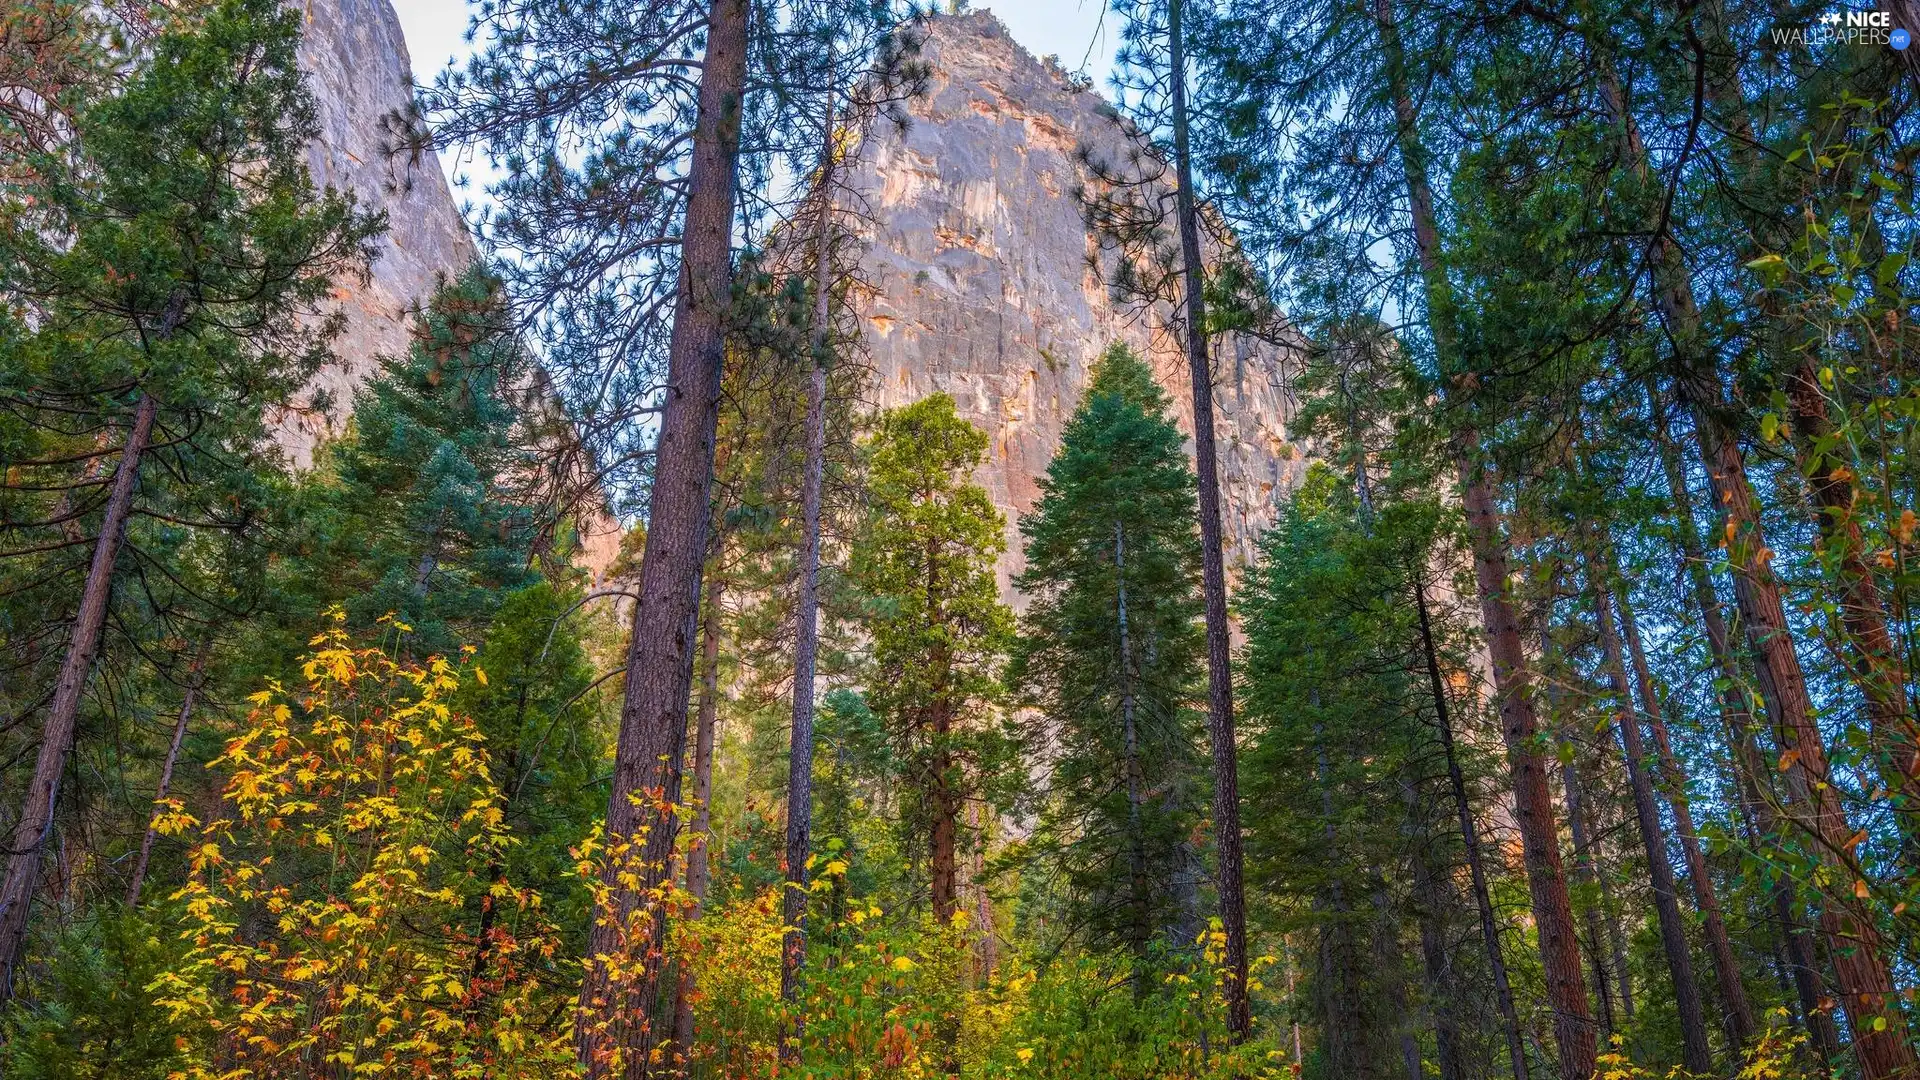 viewes, Mountains, State of California, trees, Yosemite National Park, pine, The United States